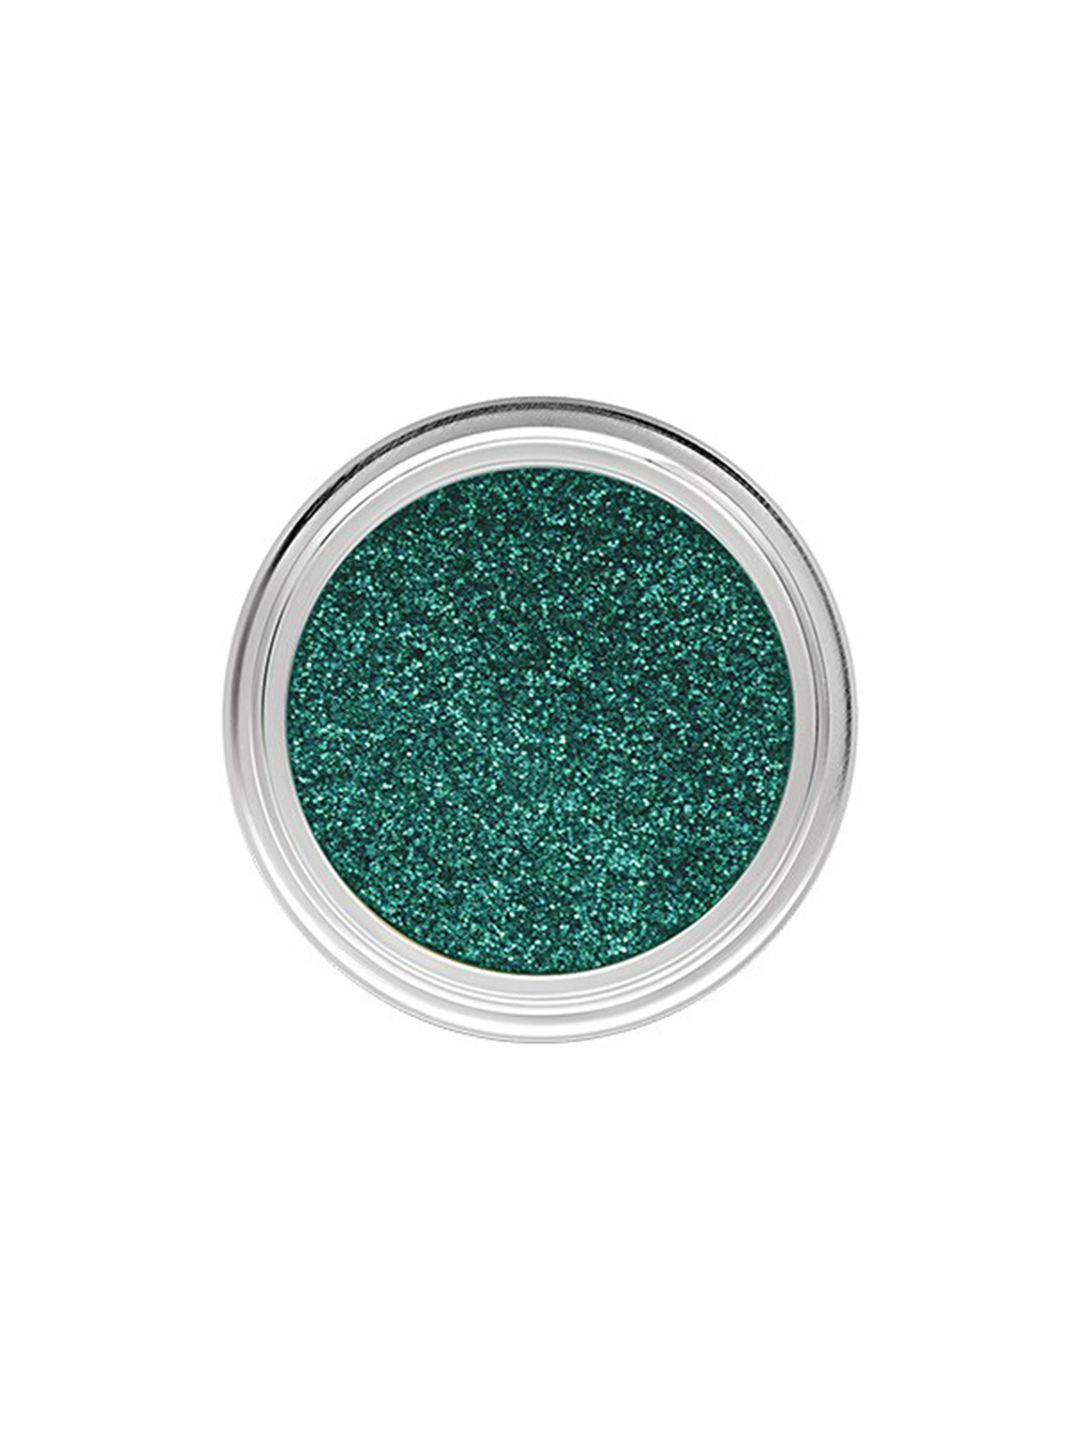 C2P PROFESSIONAL MAKEUP Uptown Loose Glitters - Bite Me 57 Price in India